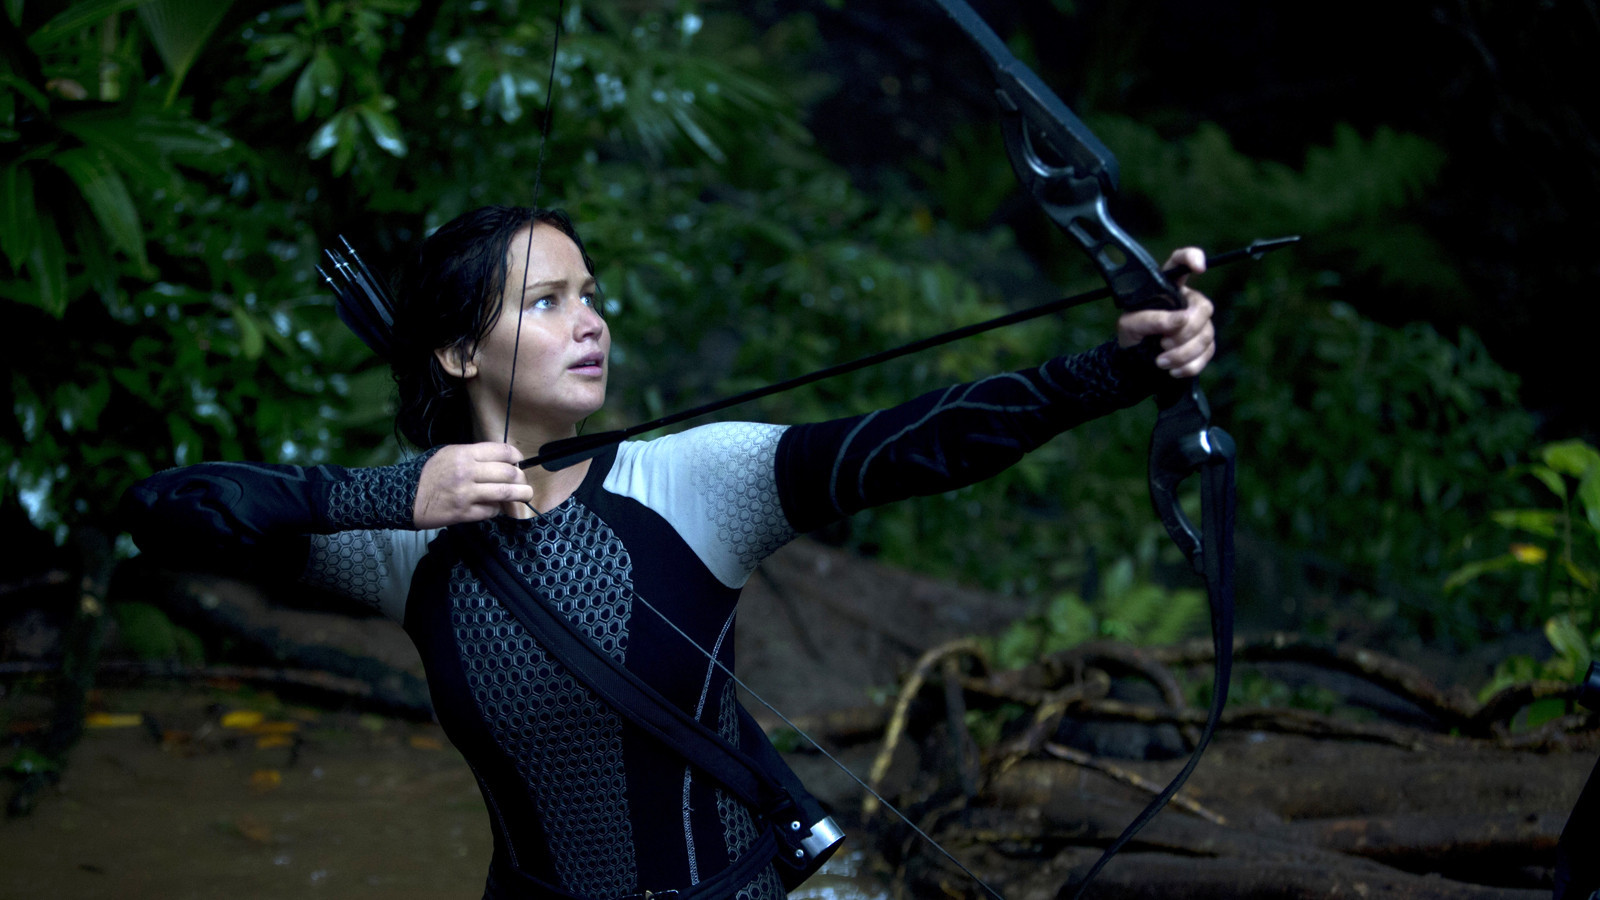 TV This Week July 20 - 26: 'The Hunger Games: Catching Fire'